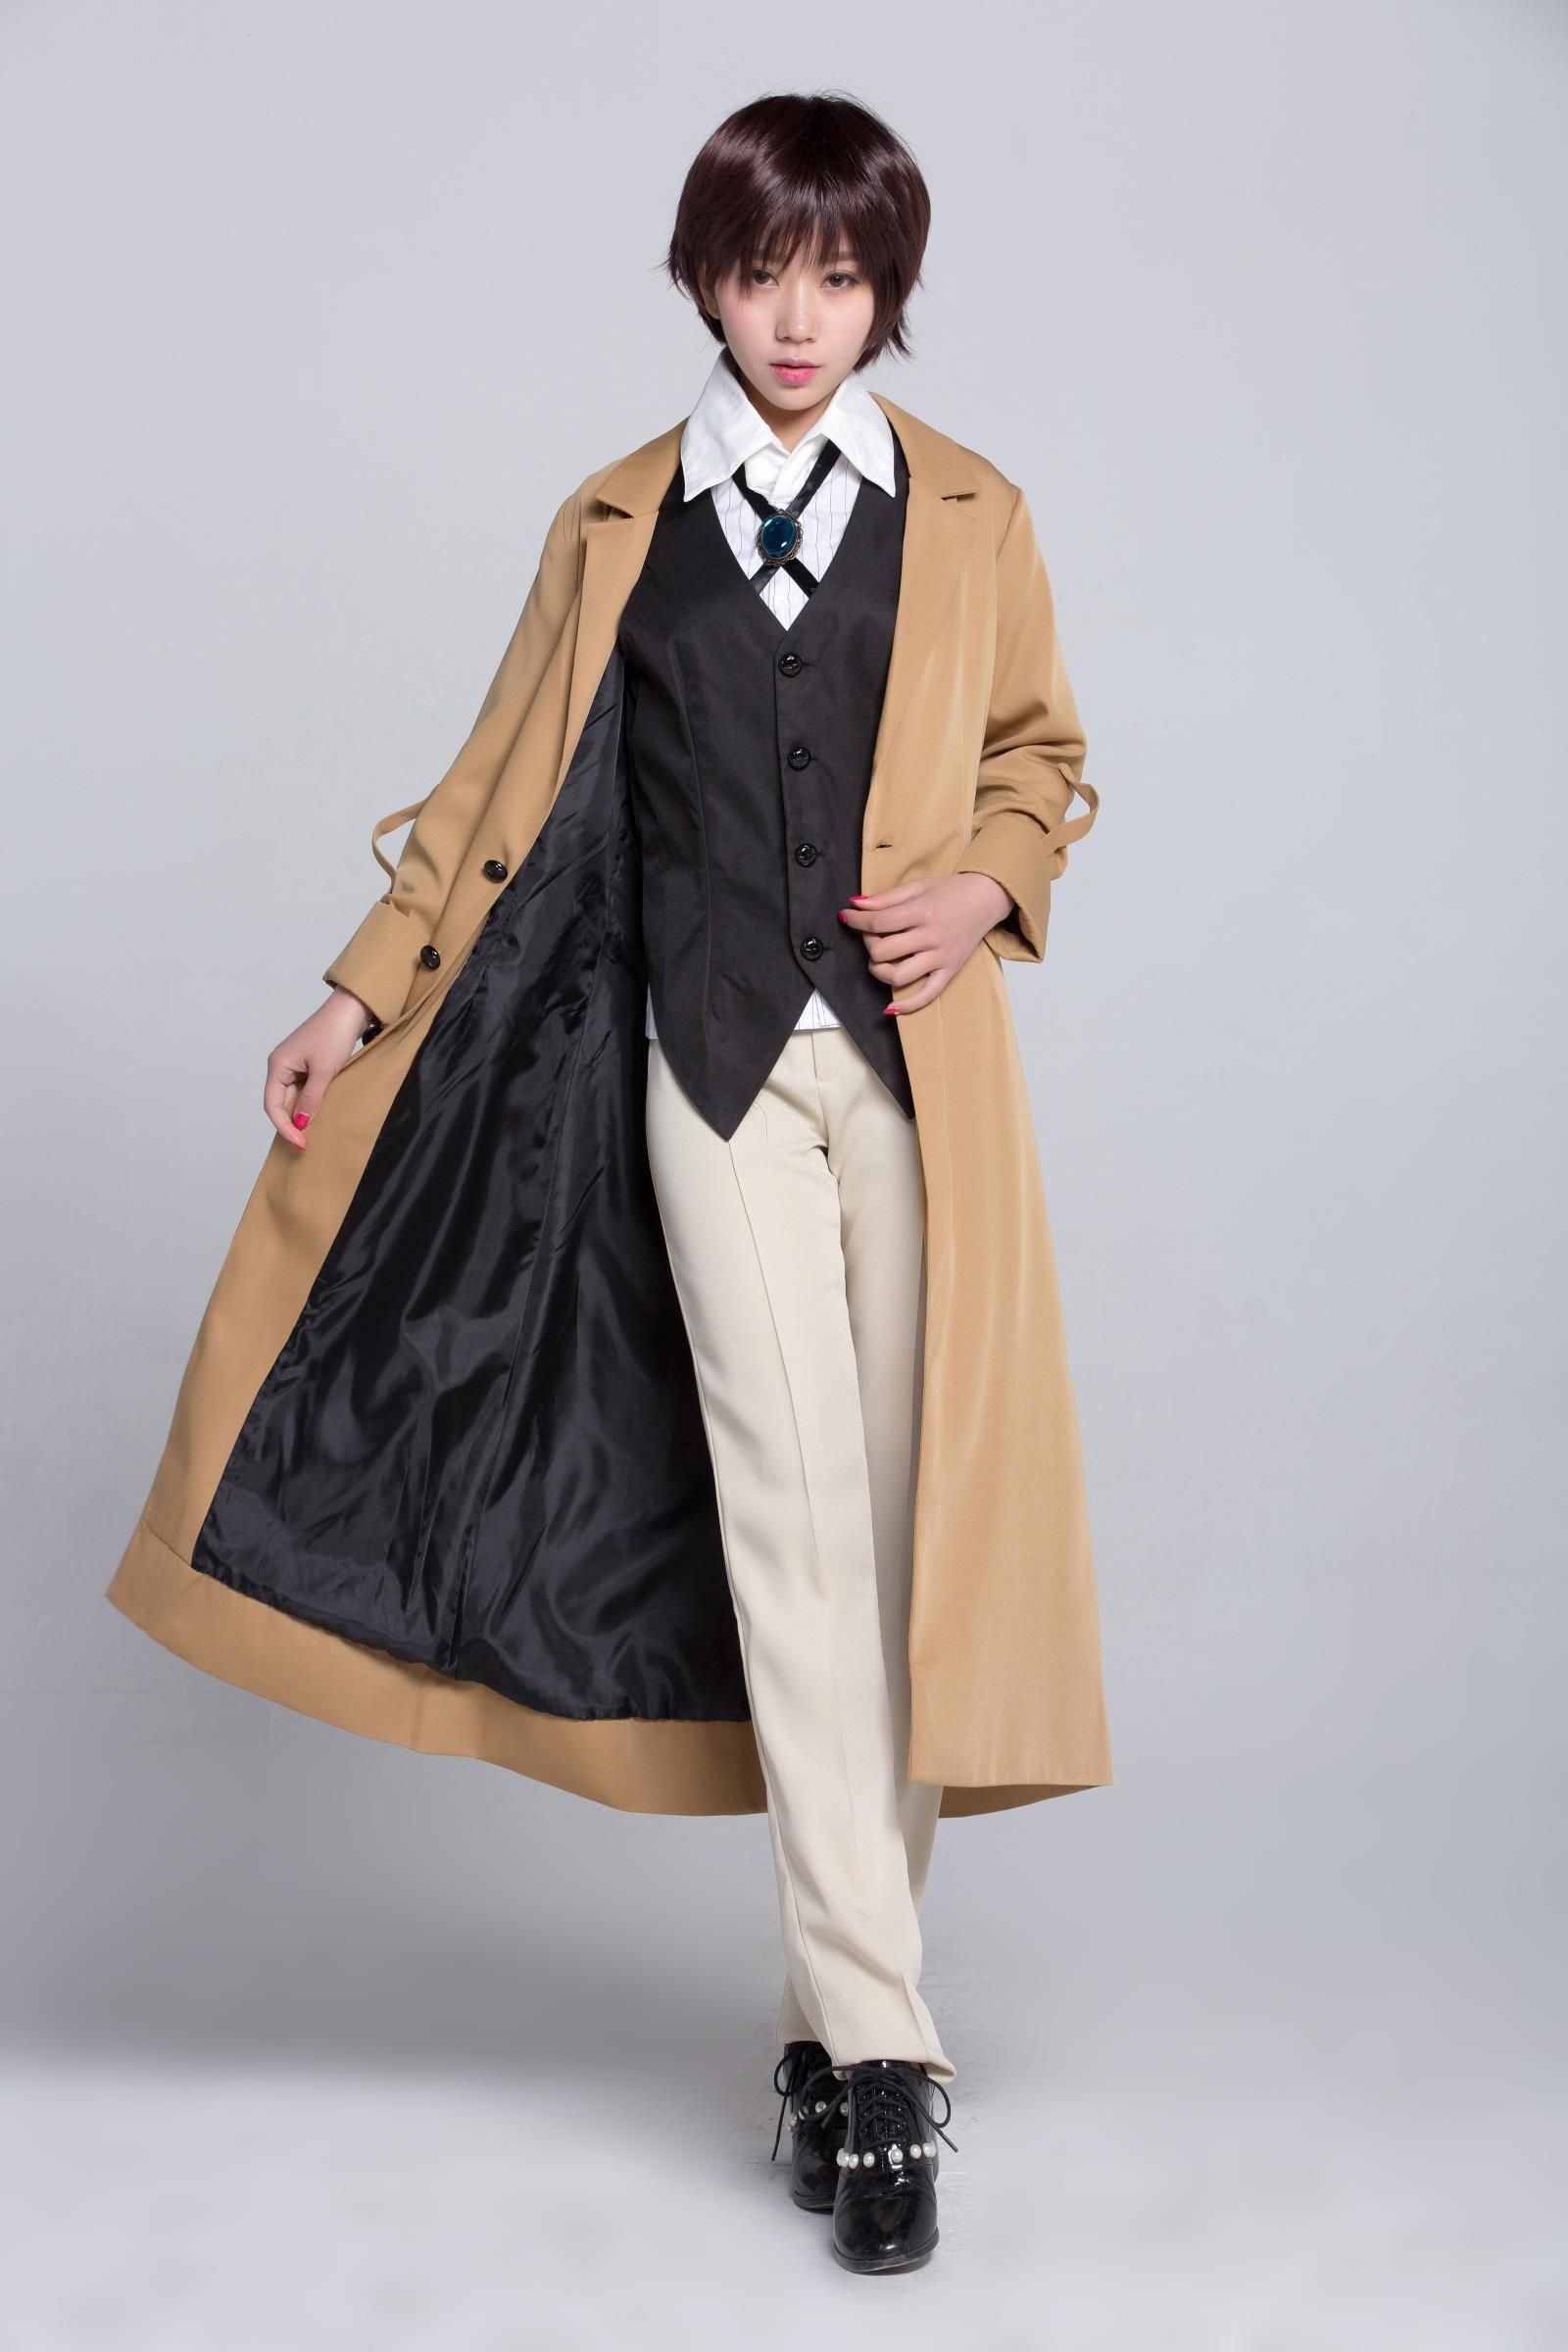 Bungo Stray Dogs Dazai Comic Cosplay Costume Costumes For Groups Family